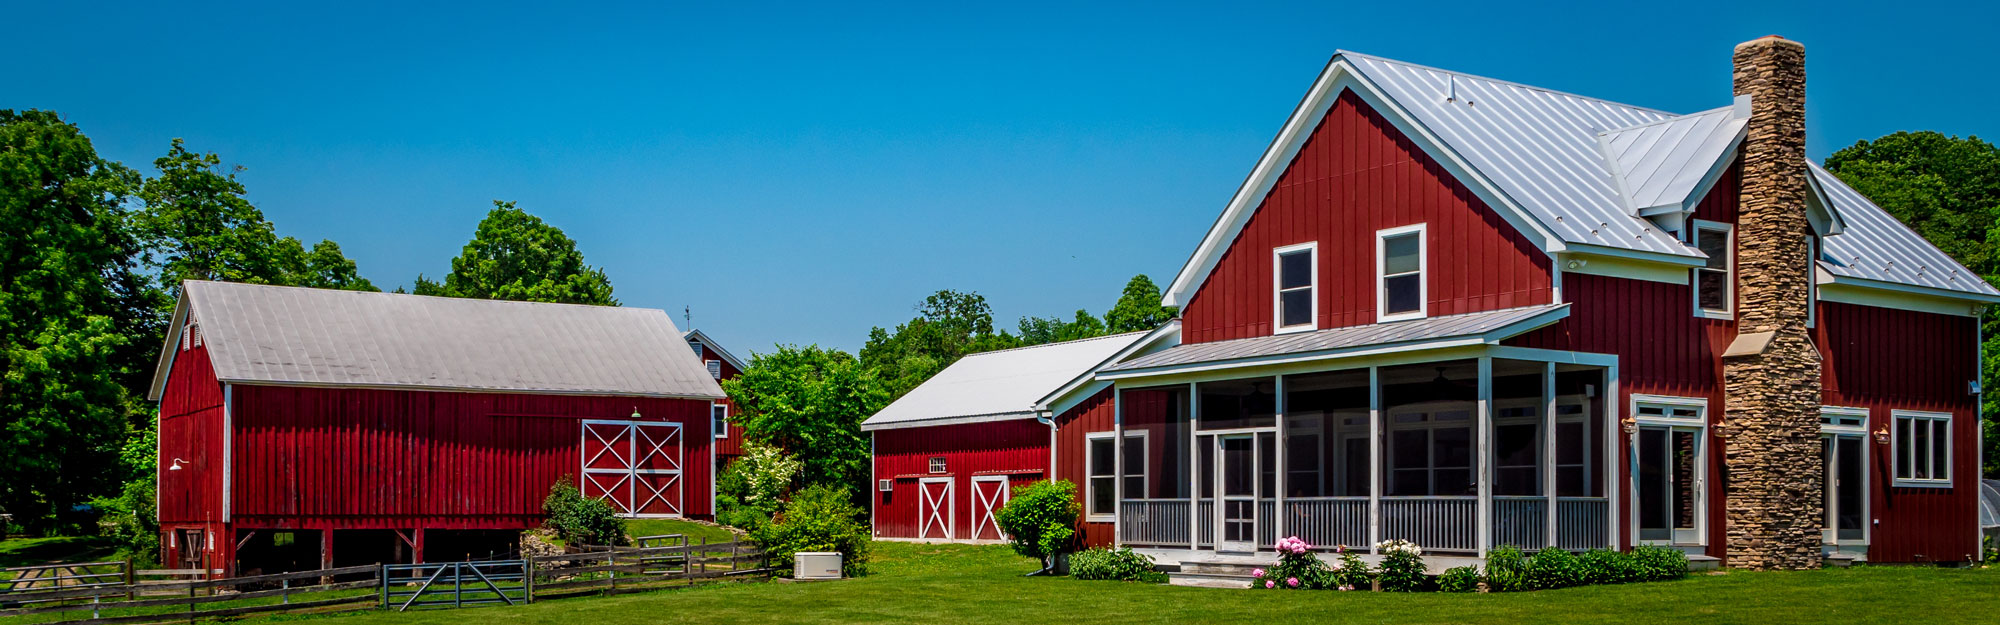 A spacious red farm area with red painted wooden sidings and white trims